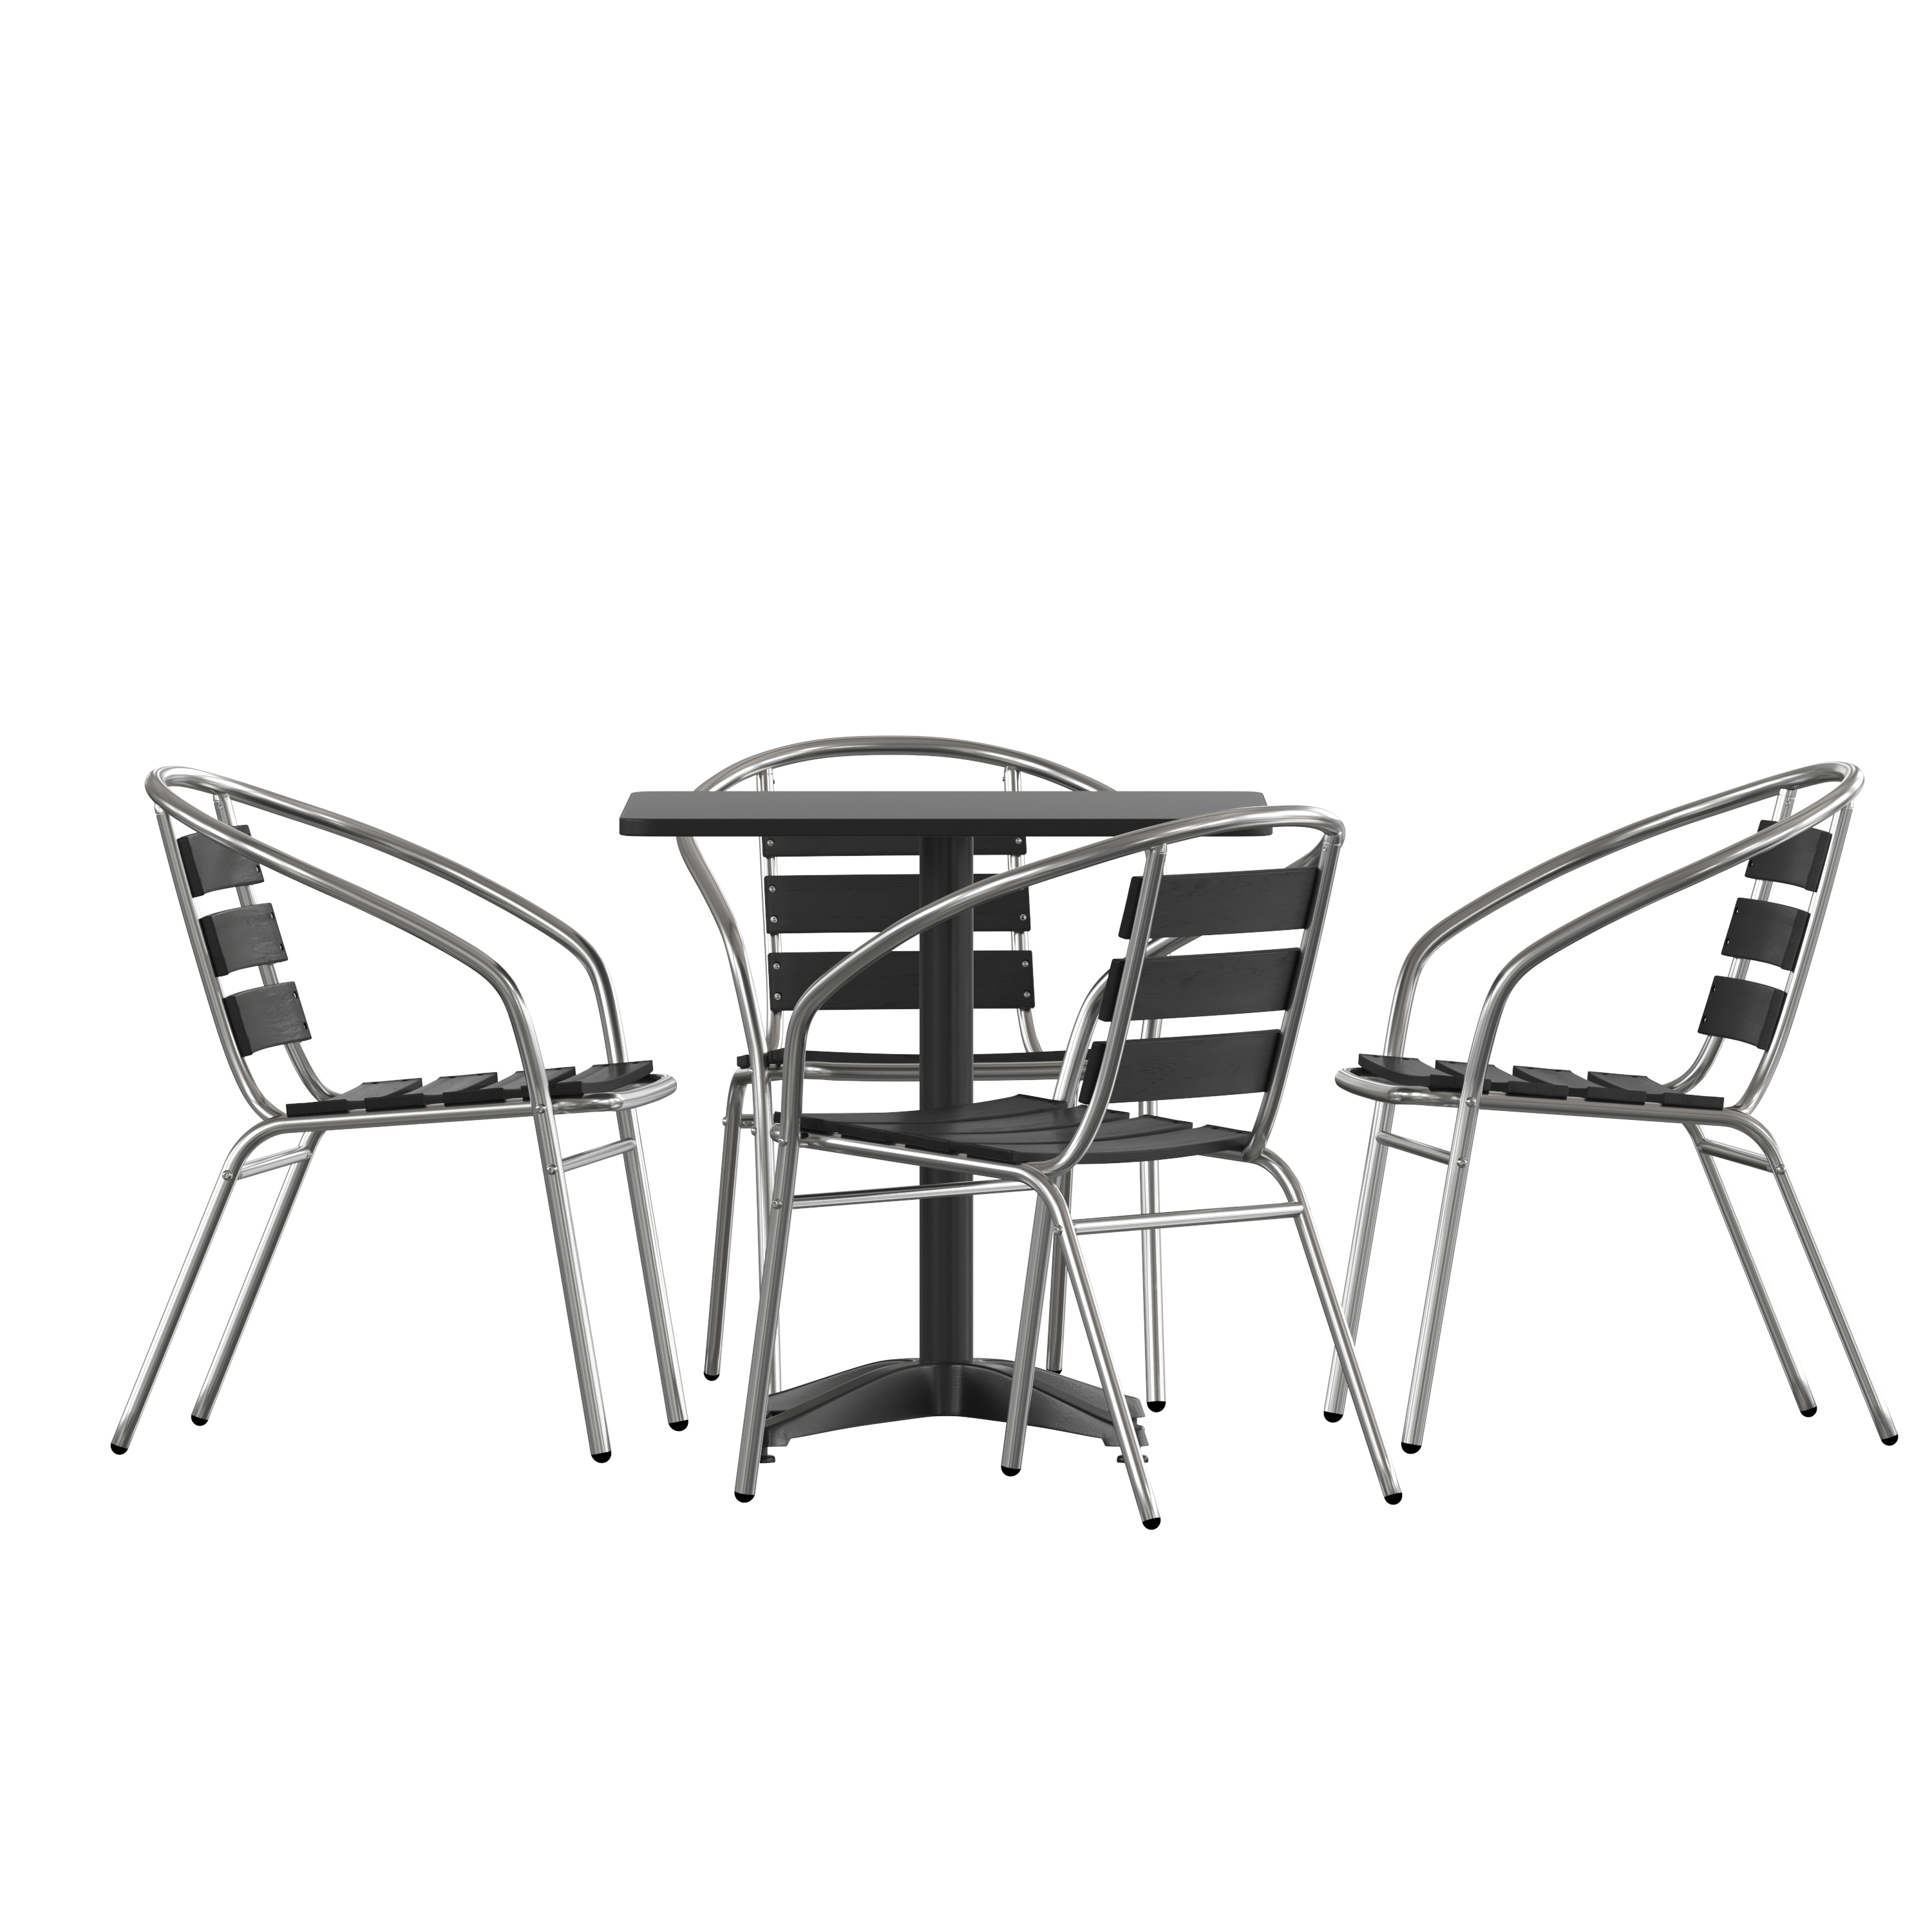 Flash Furniture TLH-ALUM-28SQ-017BK4-GG Indoor/Outdoor 27.5'' Black Square Aluminum Table with 4 Black Slat Back Chairs, 5 Piece Set